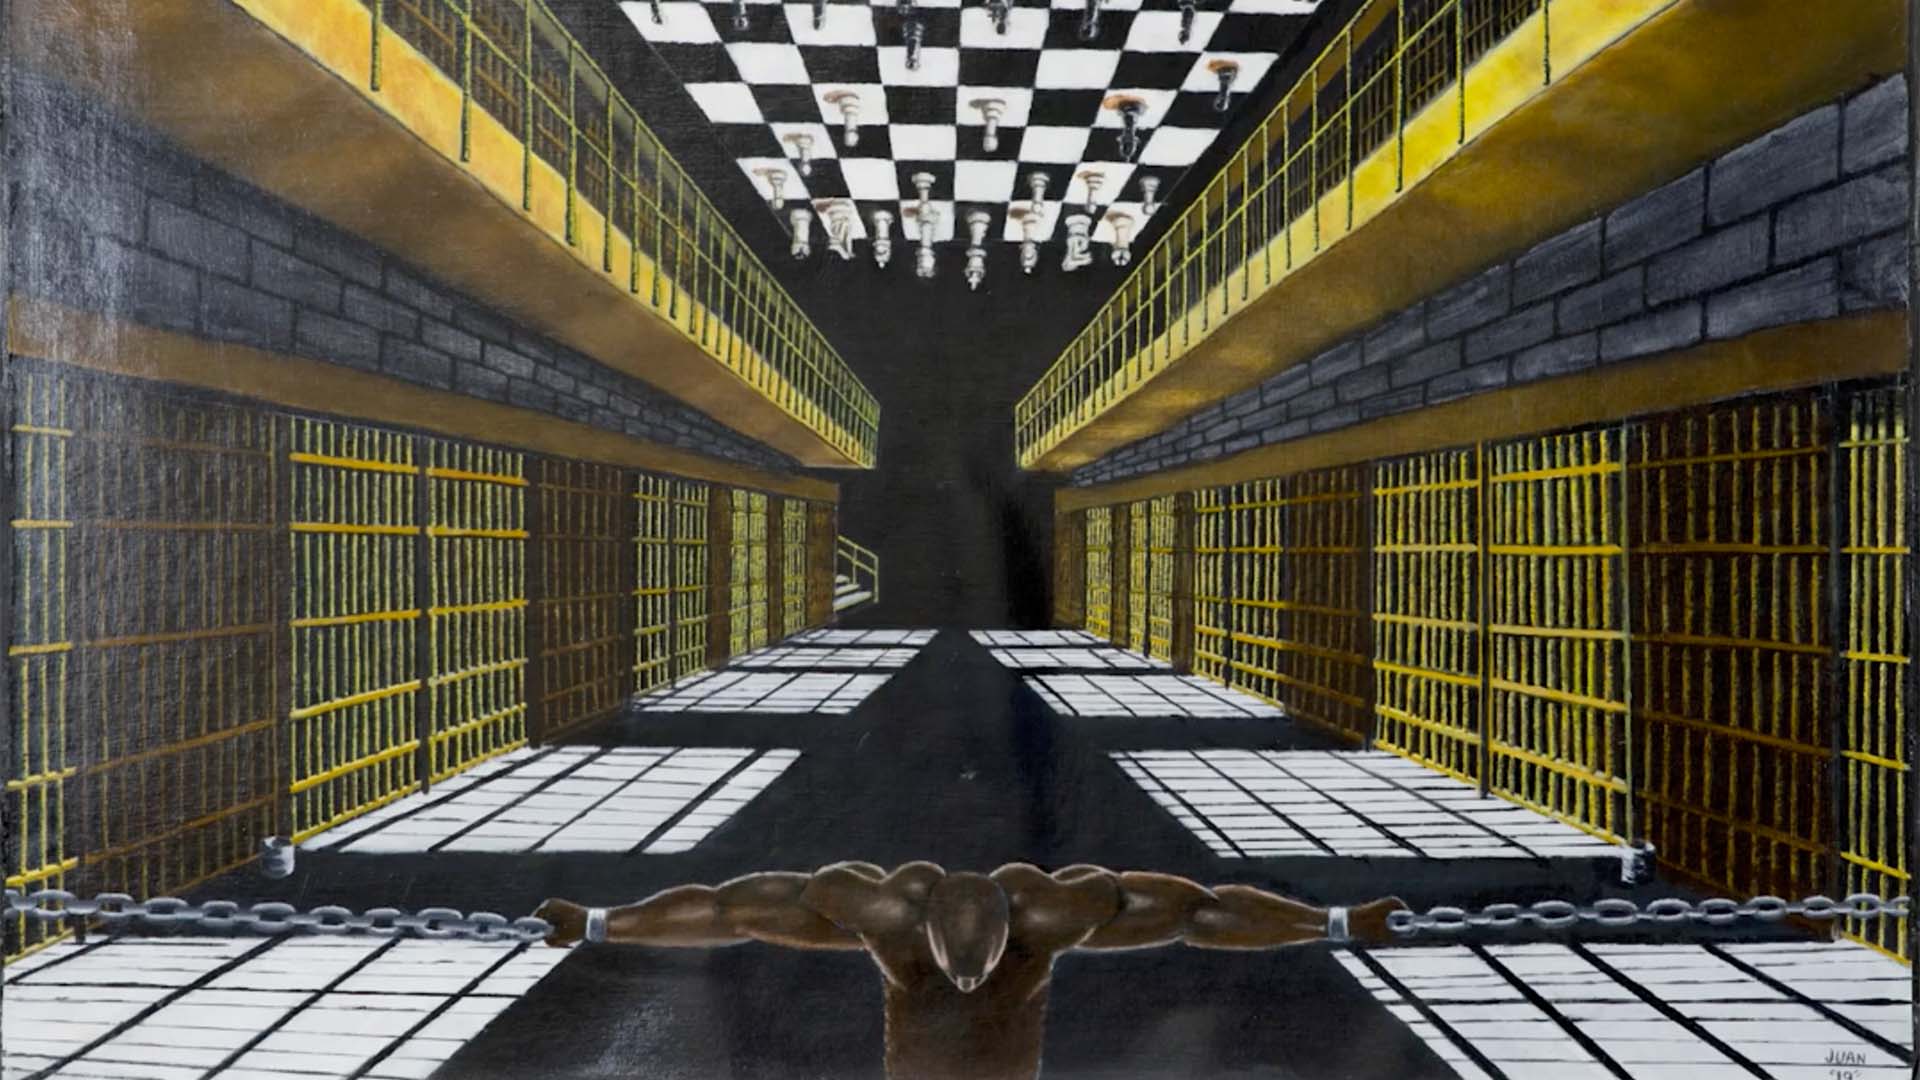 Painting of a chained man in prison with a chess board above him